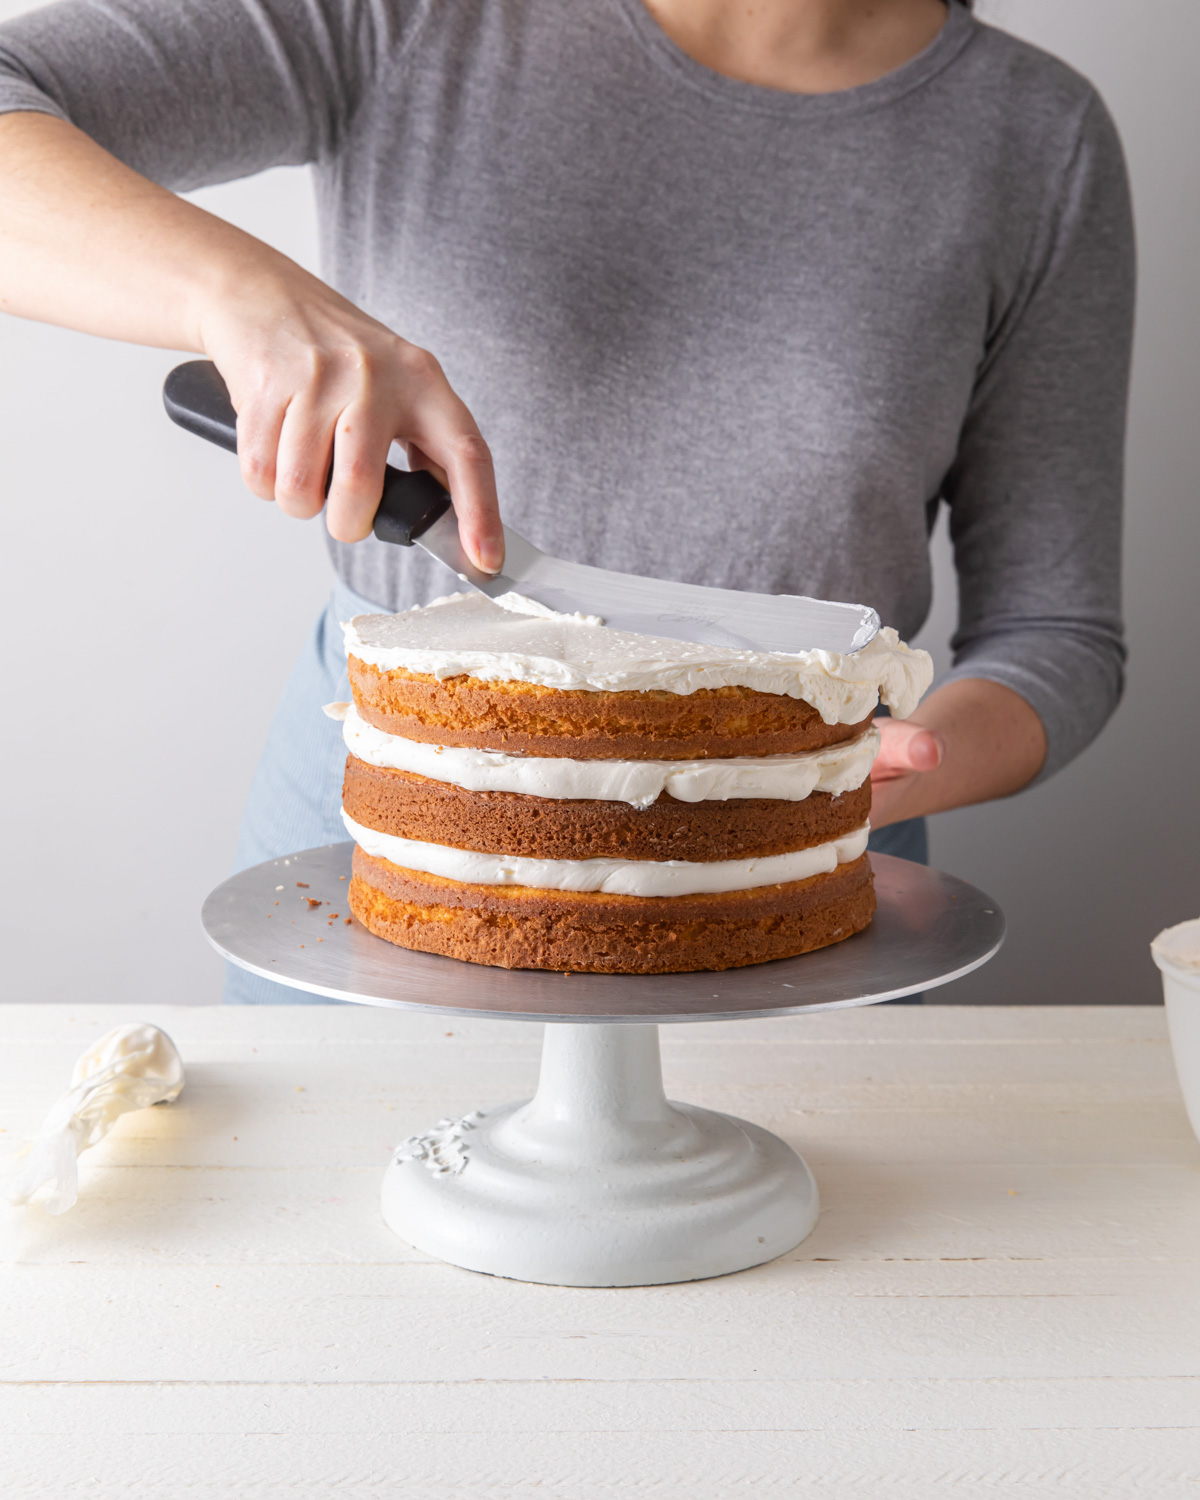 Spread frosting on a layer cake